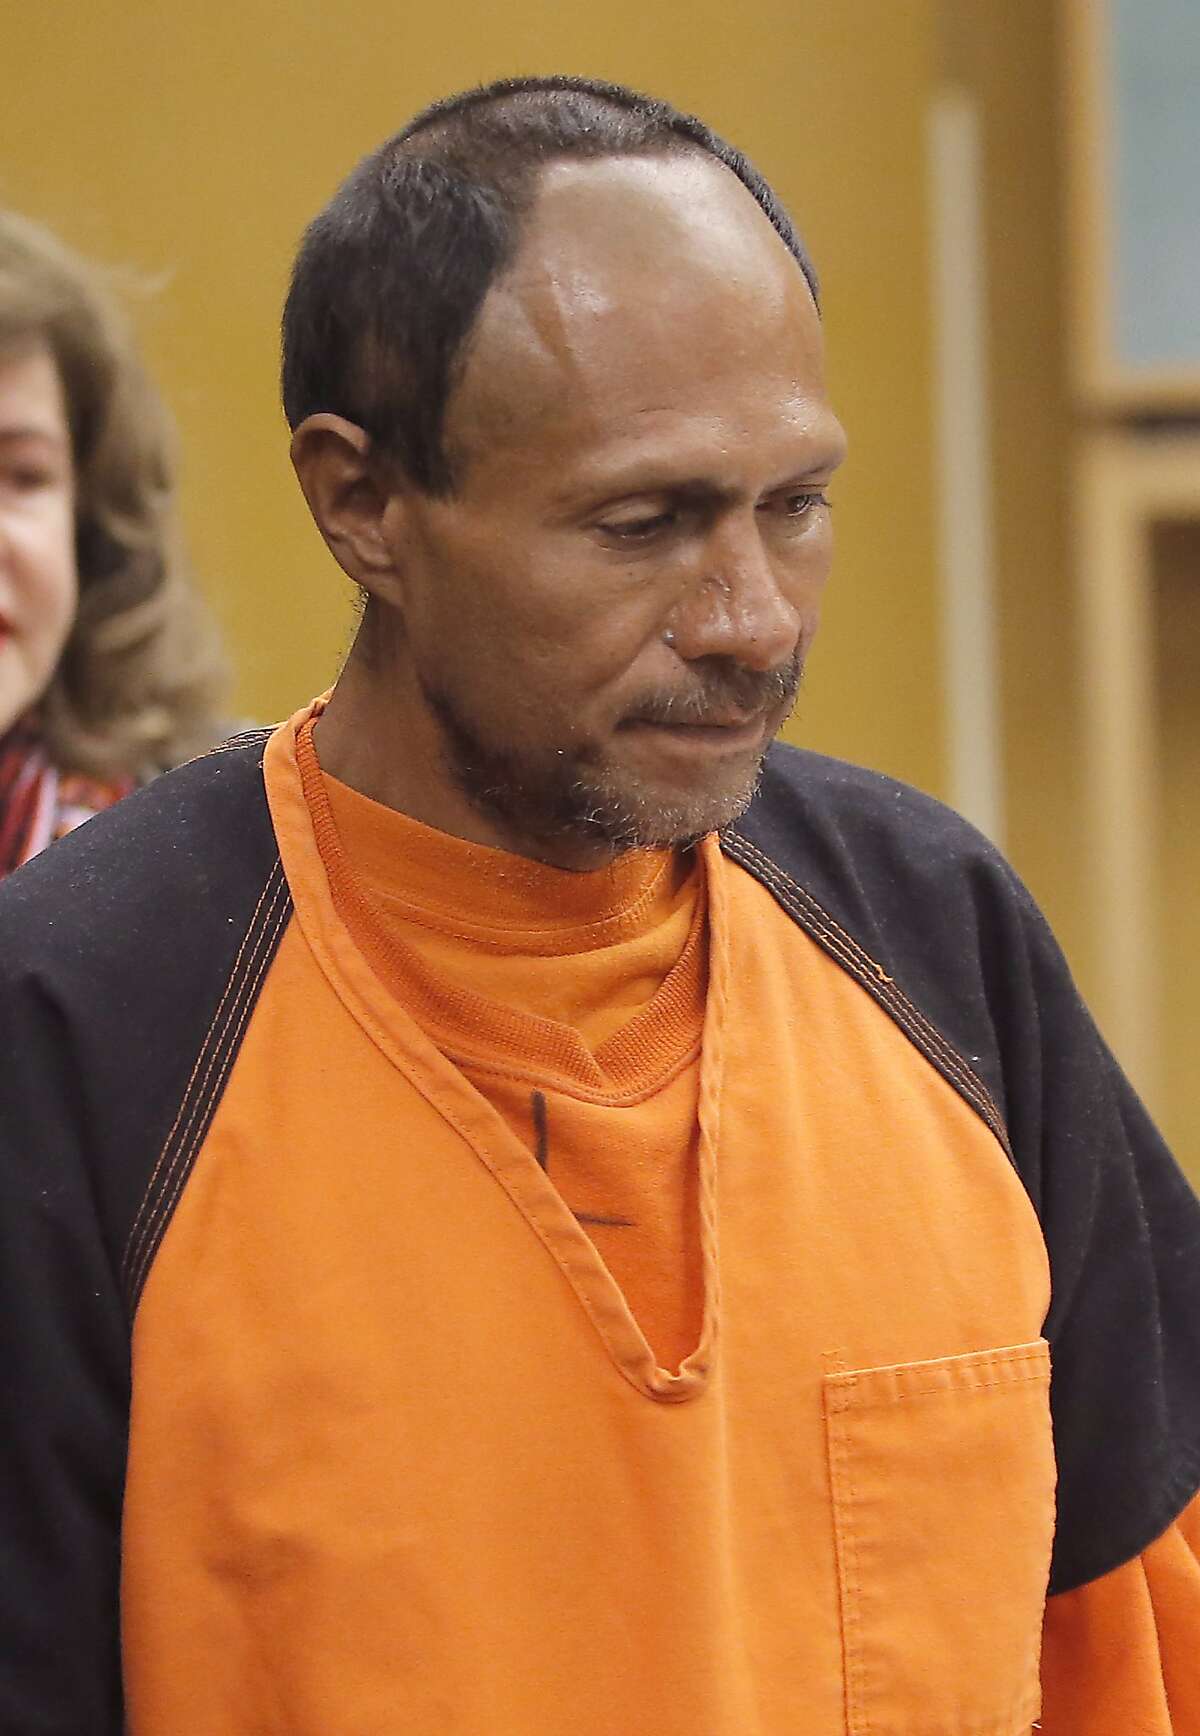 Francisco Sanchez walks into the court for his arraignment at the Hall of Justice on Tuesday, July 7, 2015, in San Francisco. Prosecutors have charged the Mexican immigrant with murder in the waterfront shooting death of 32-year-old Kathryn Steinle. (Michael Macor/San Francisco Chronicle via AP, Pool)